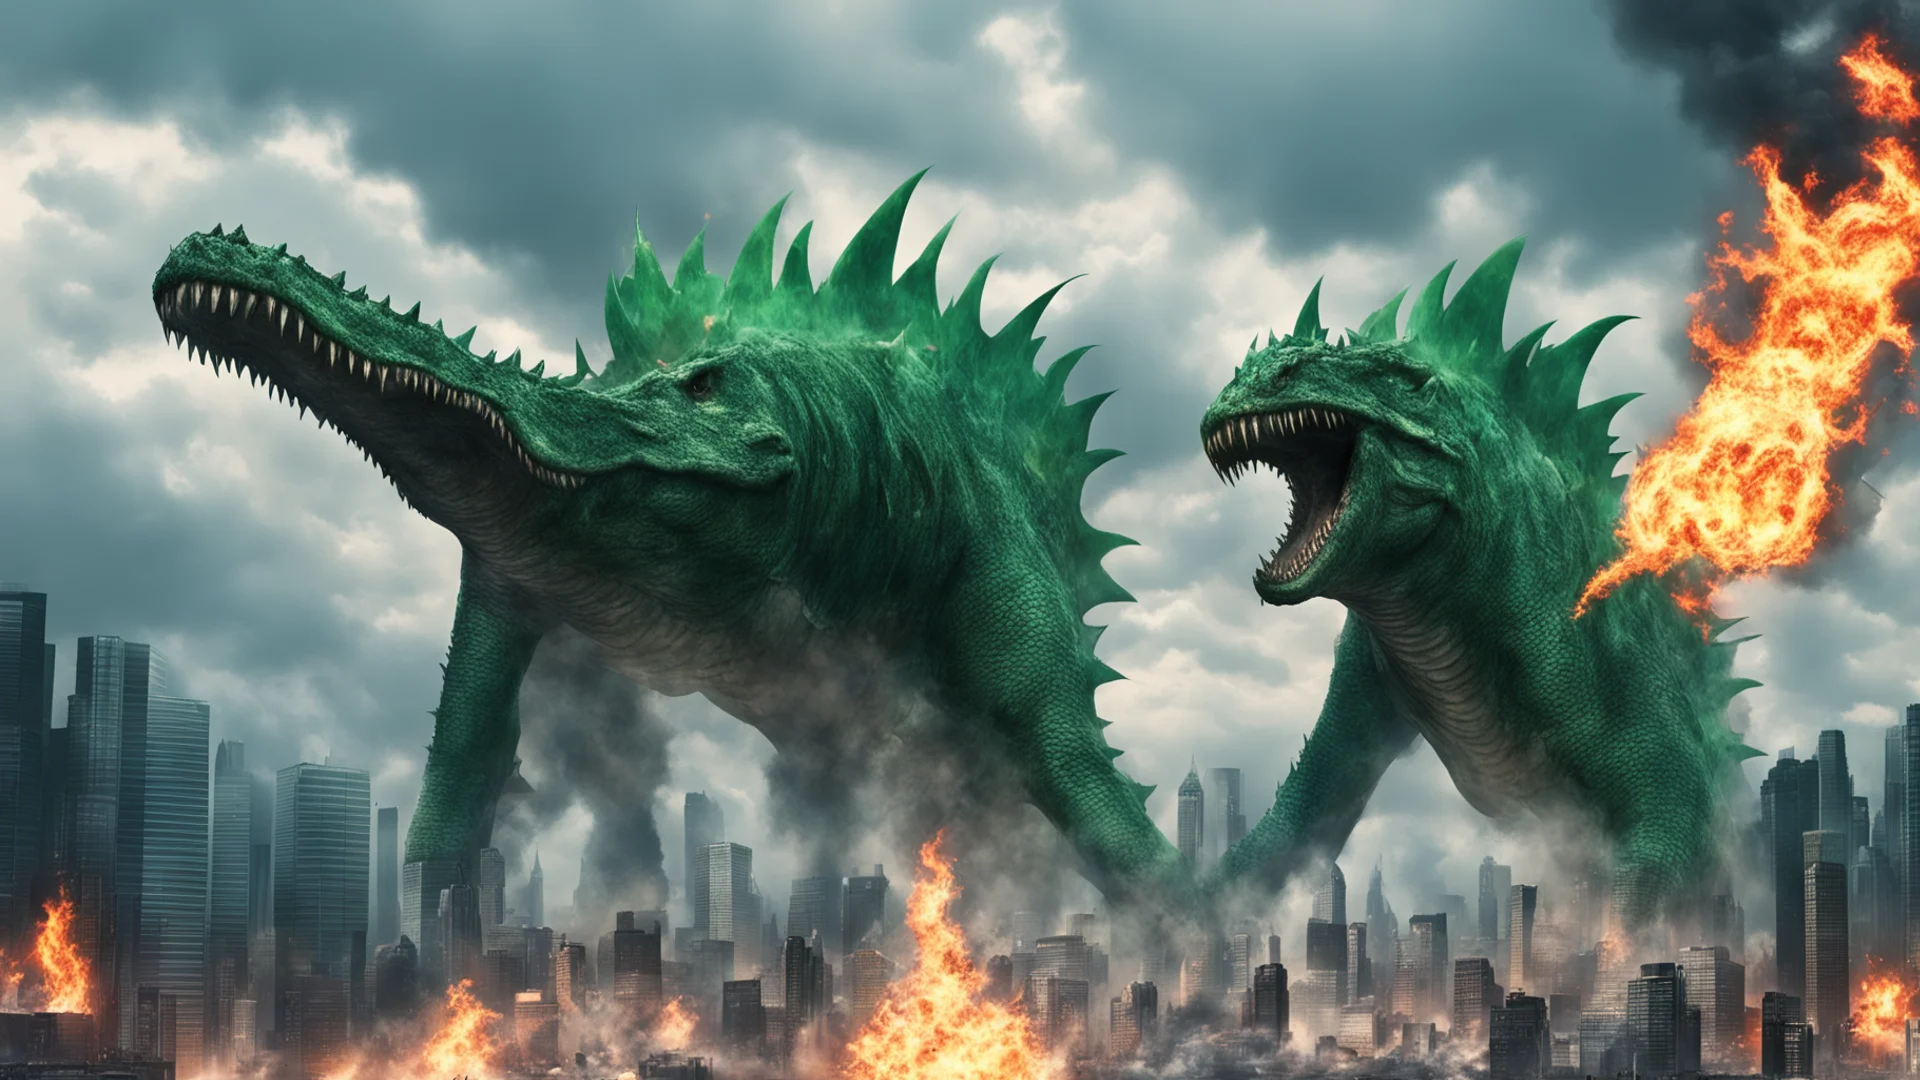 aikaiju that has 1 long tail and that is a hybrid mosasaurus and has green fire coming out of its mouth destroying the city  amazing awesome portrait 2 wide